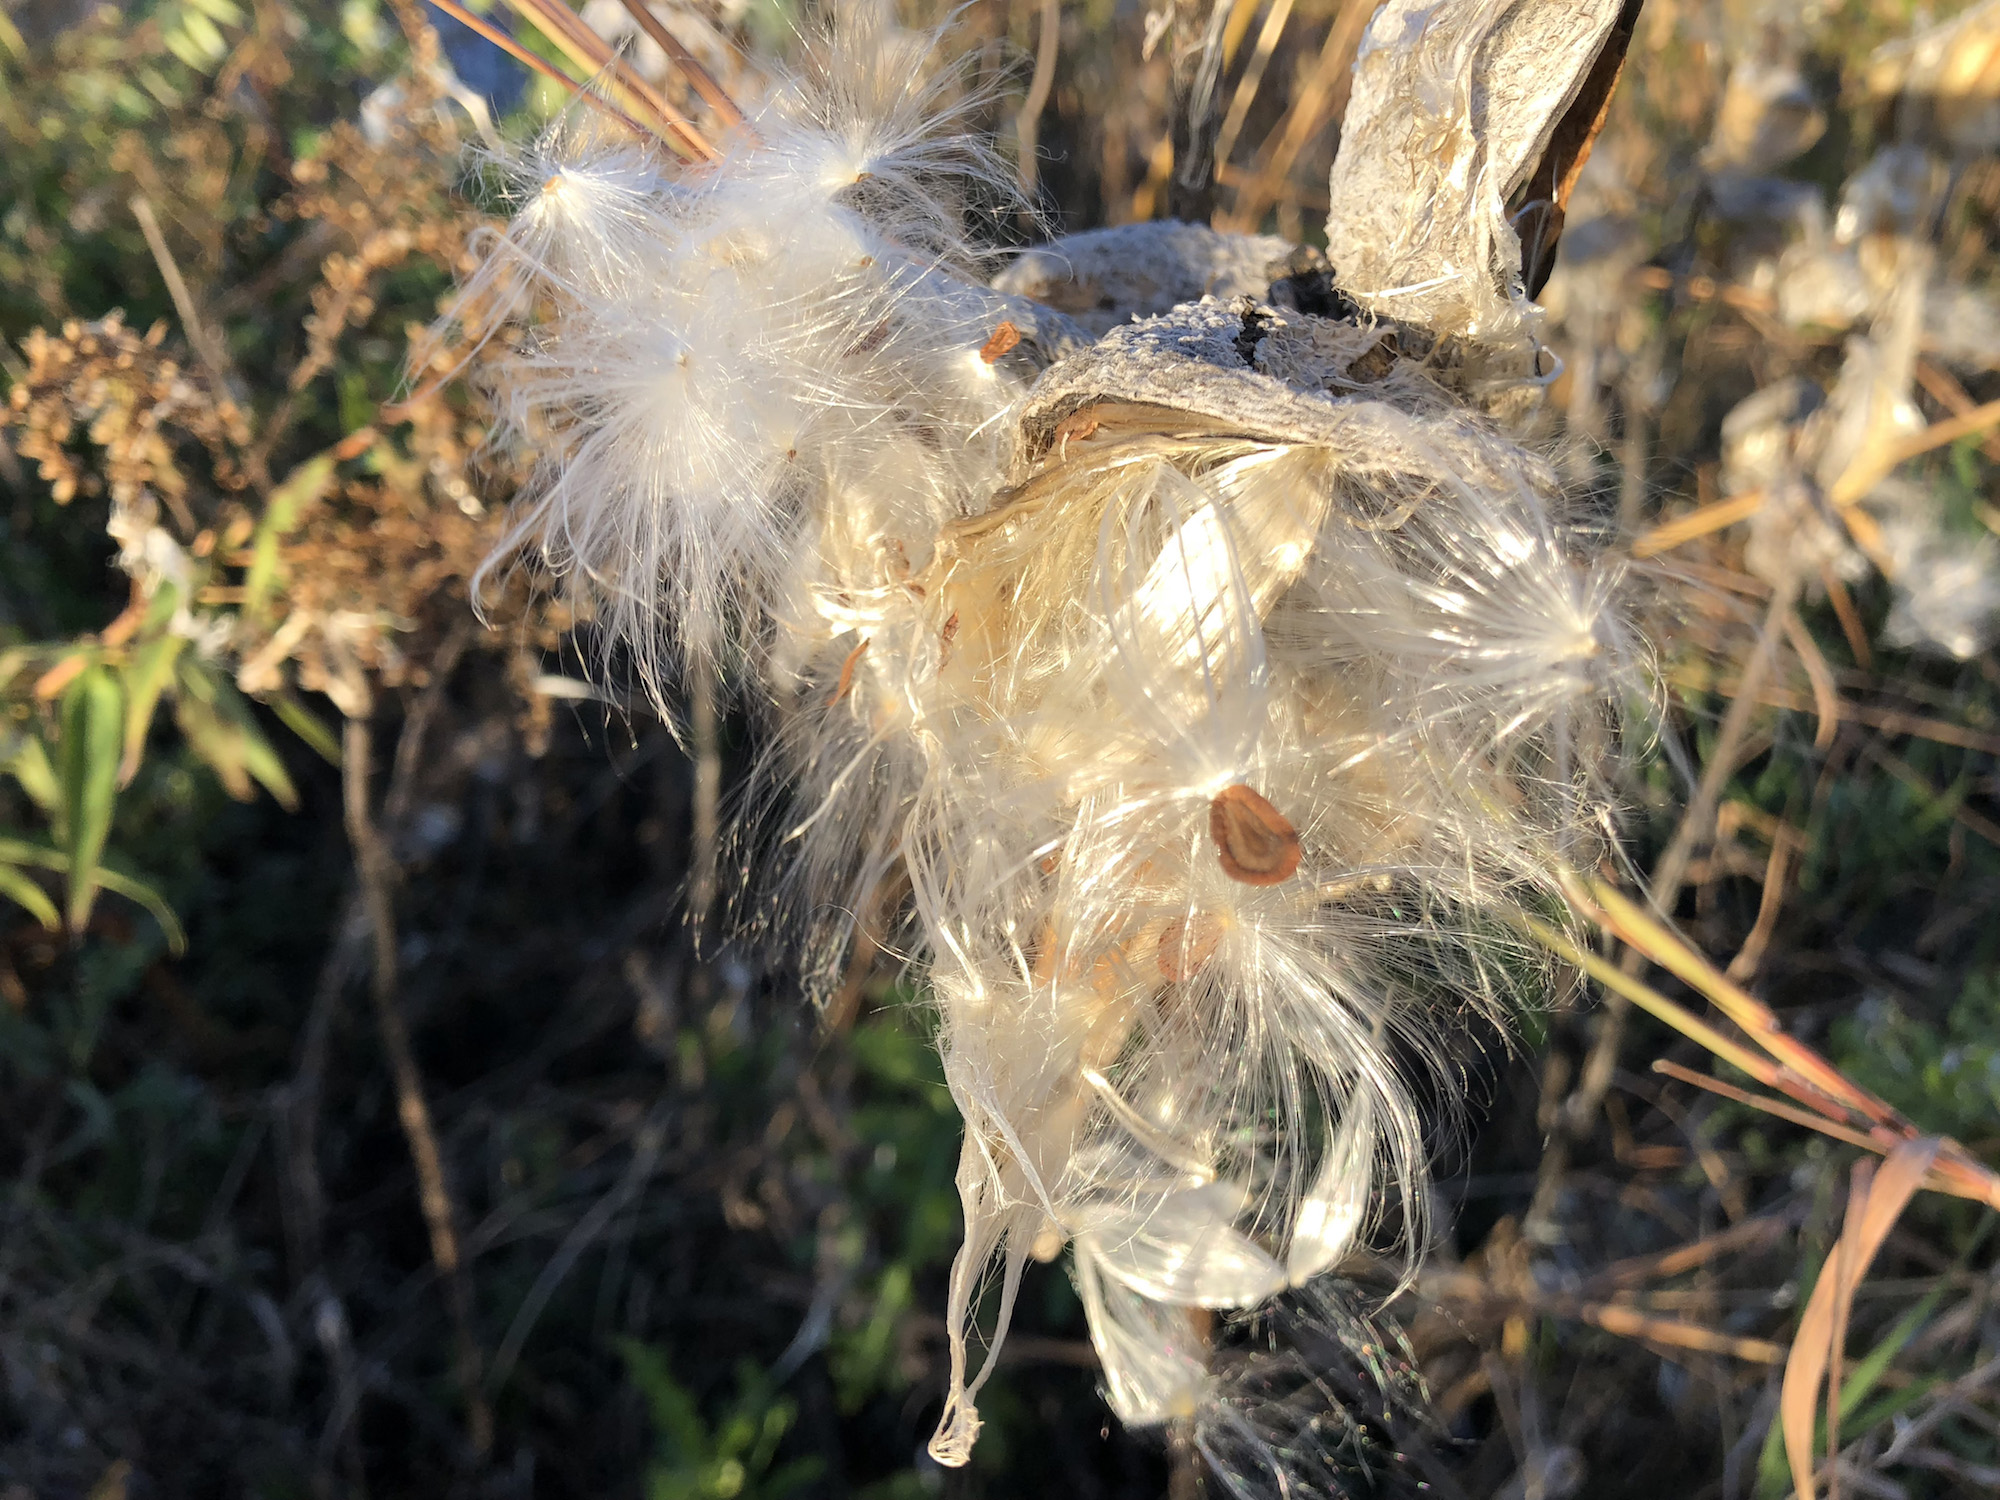 Common Milkweed by Marion Dunn Pond on October 20, 2018.